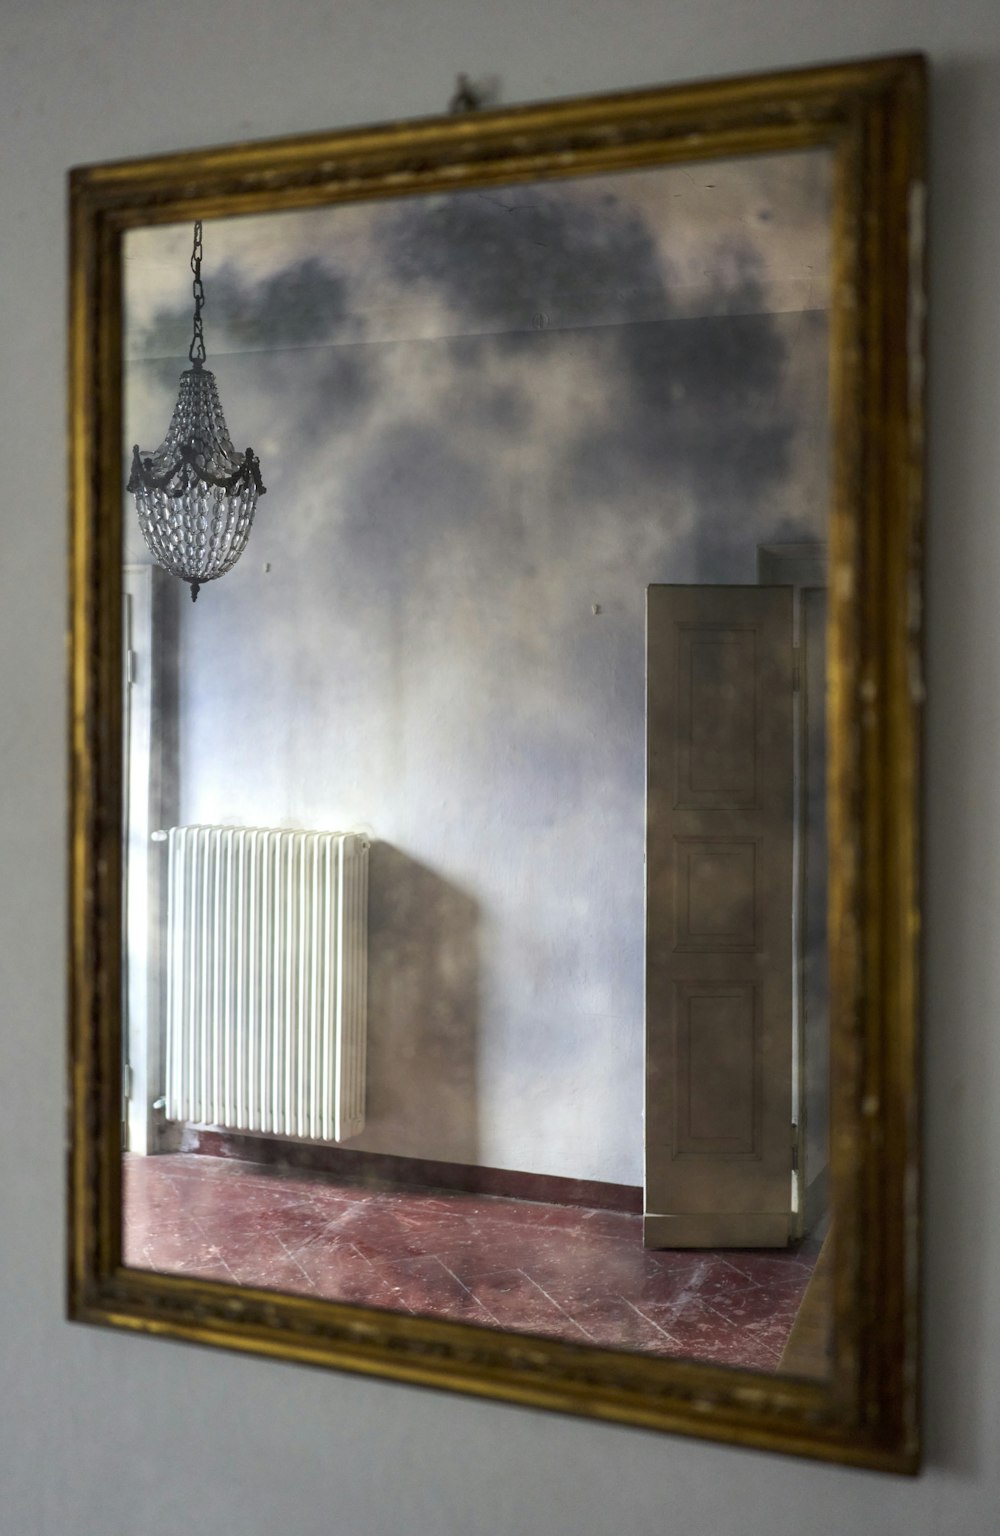 a mirror reflecting a room with a radiator and a chandelier